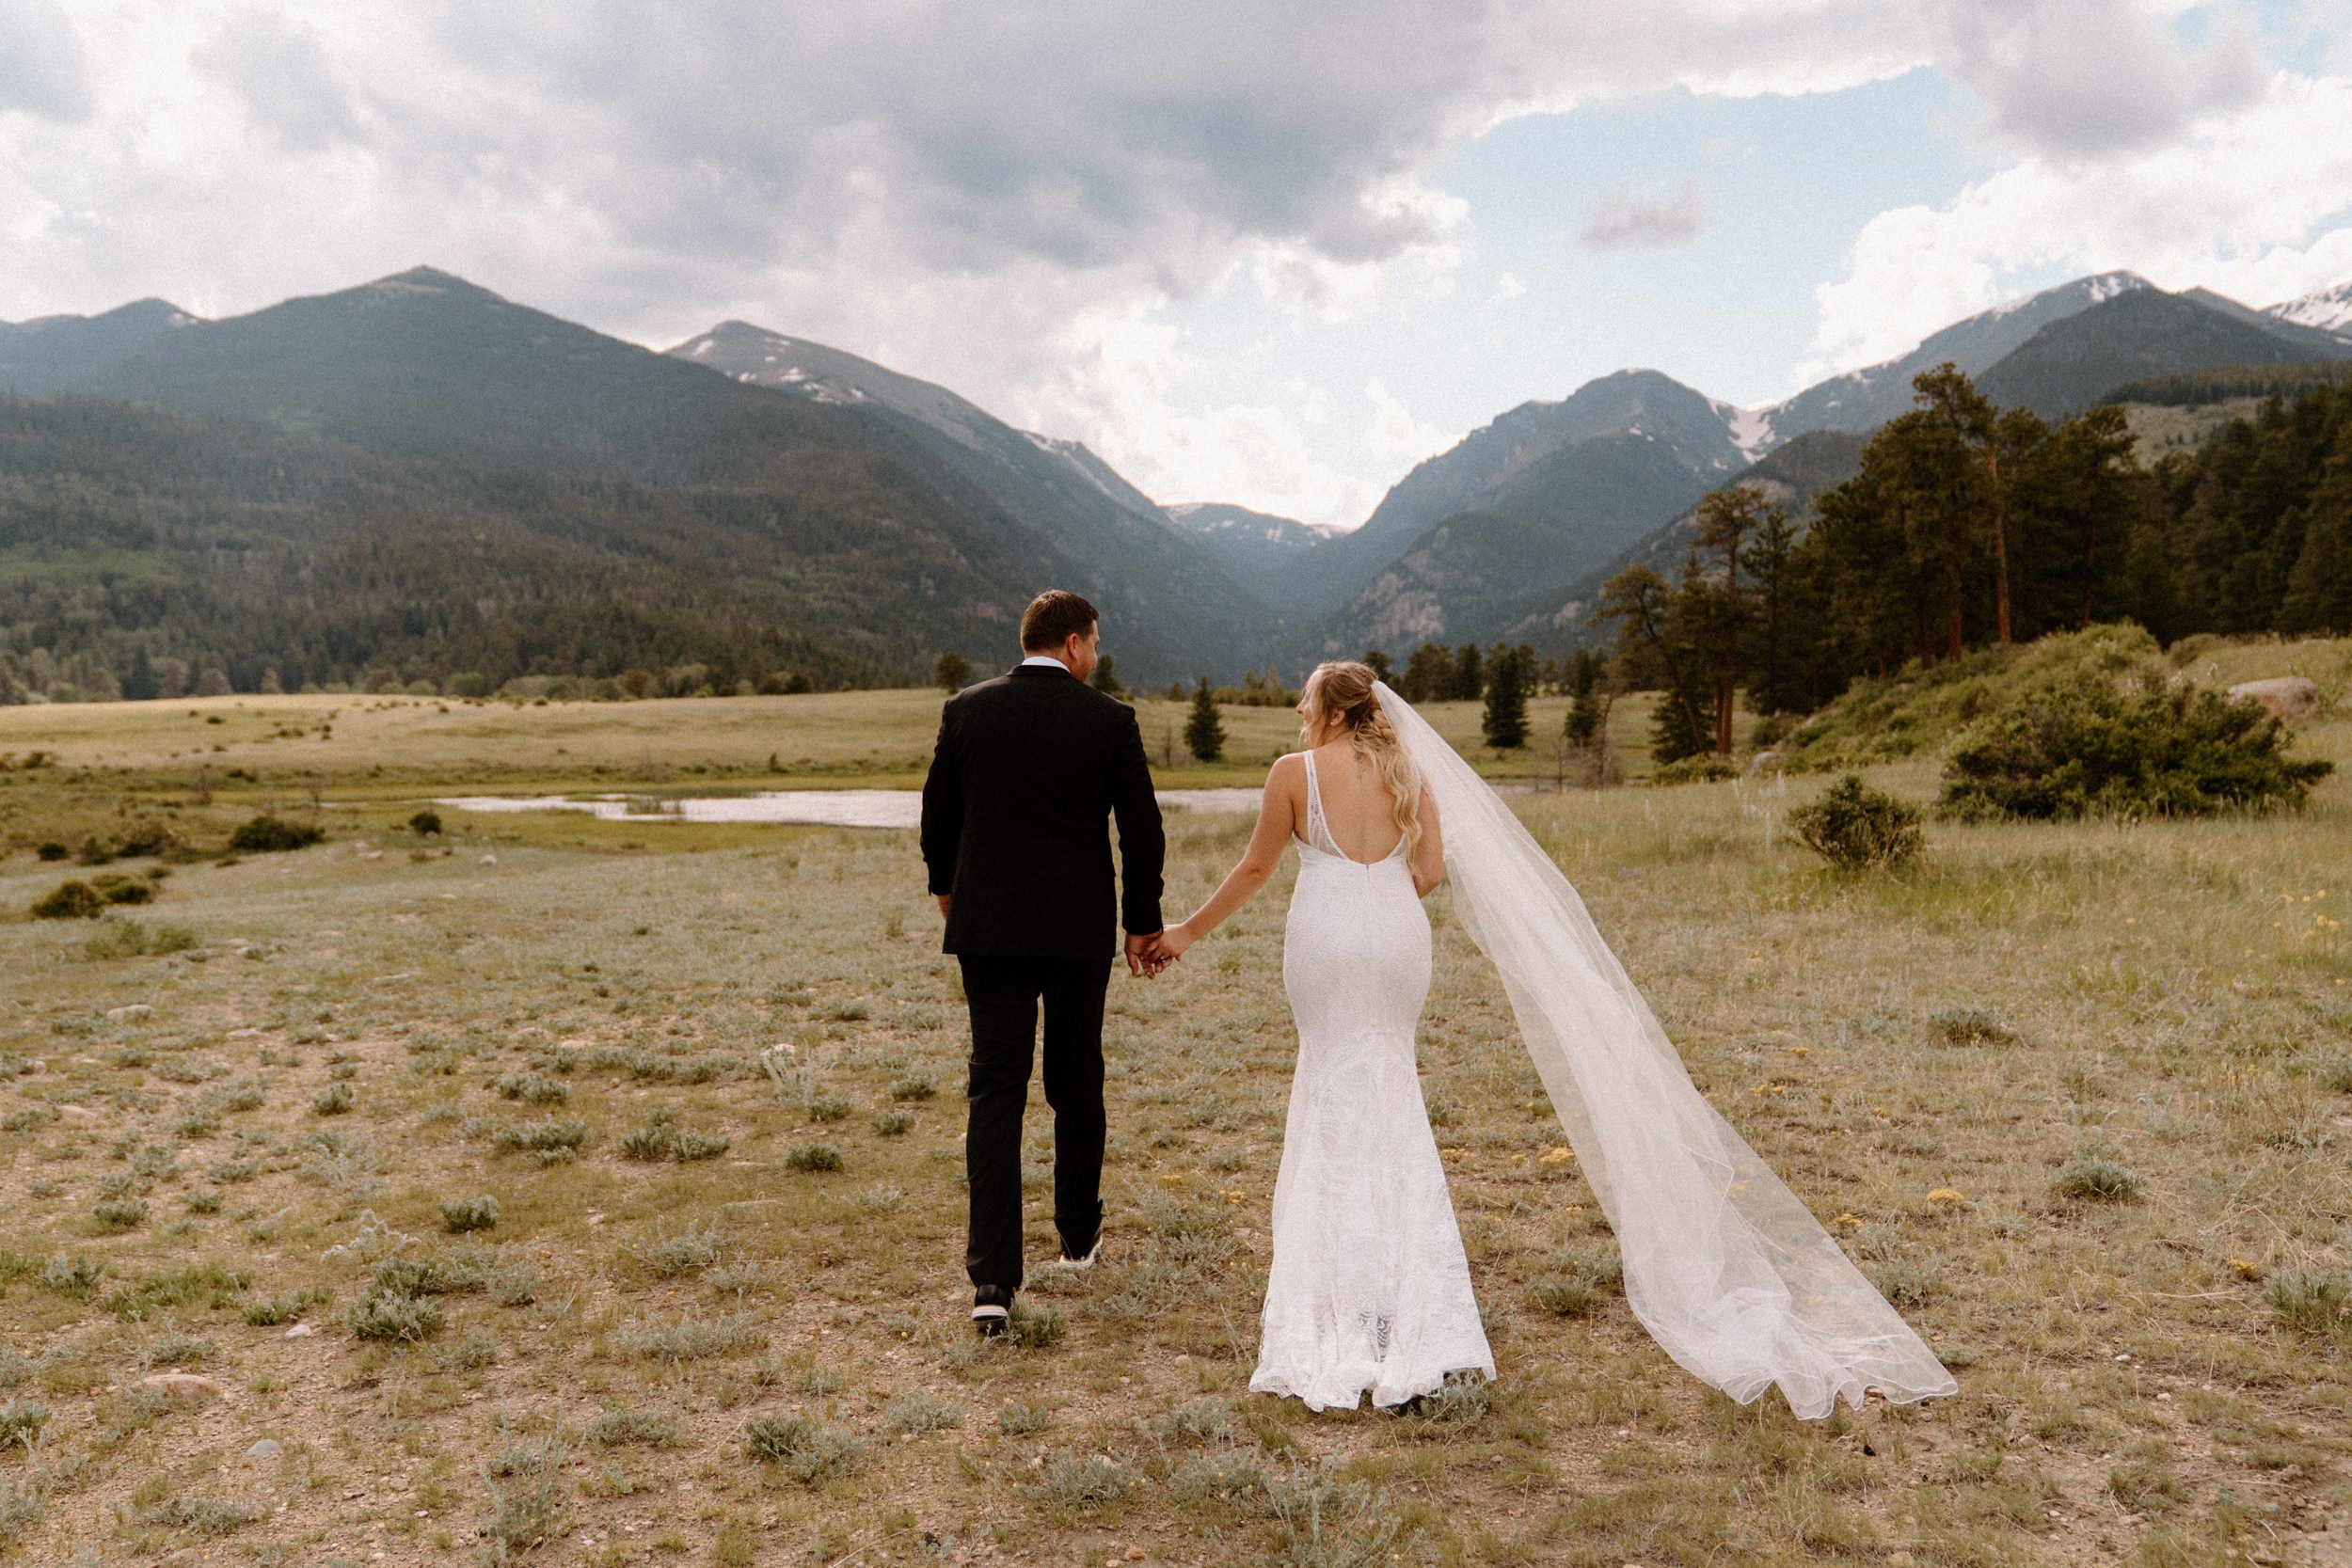 The bride and groom hold hands as they walk through a mountain valley in Estes Park, CO